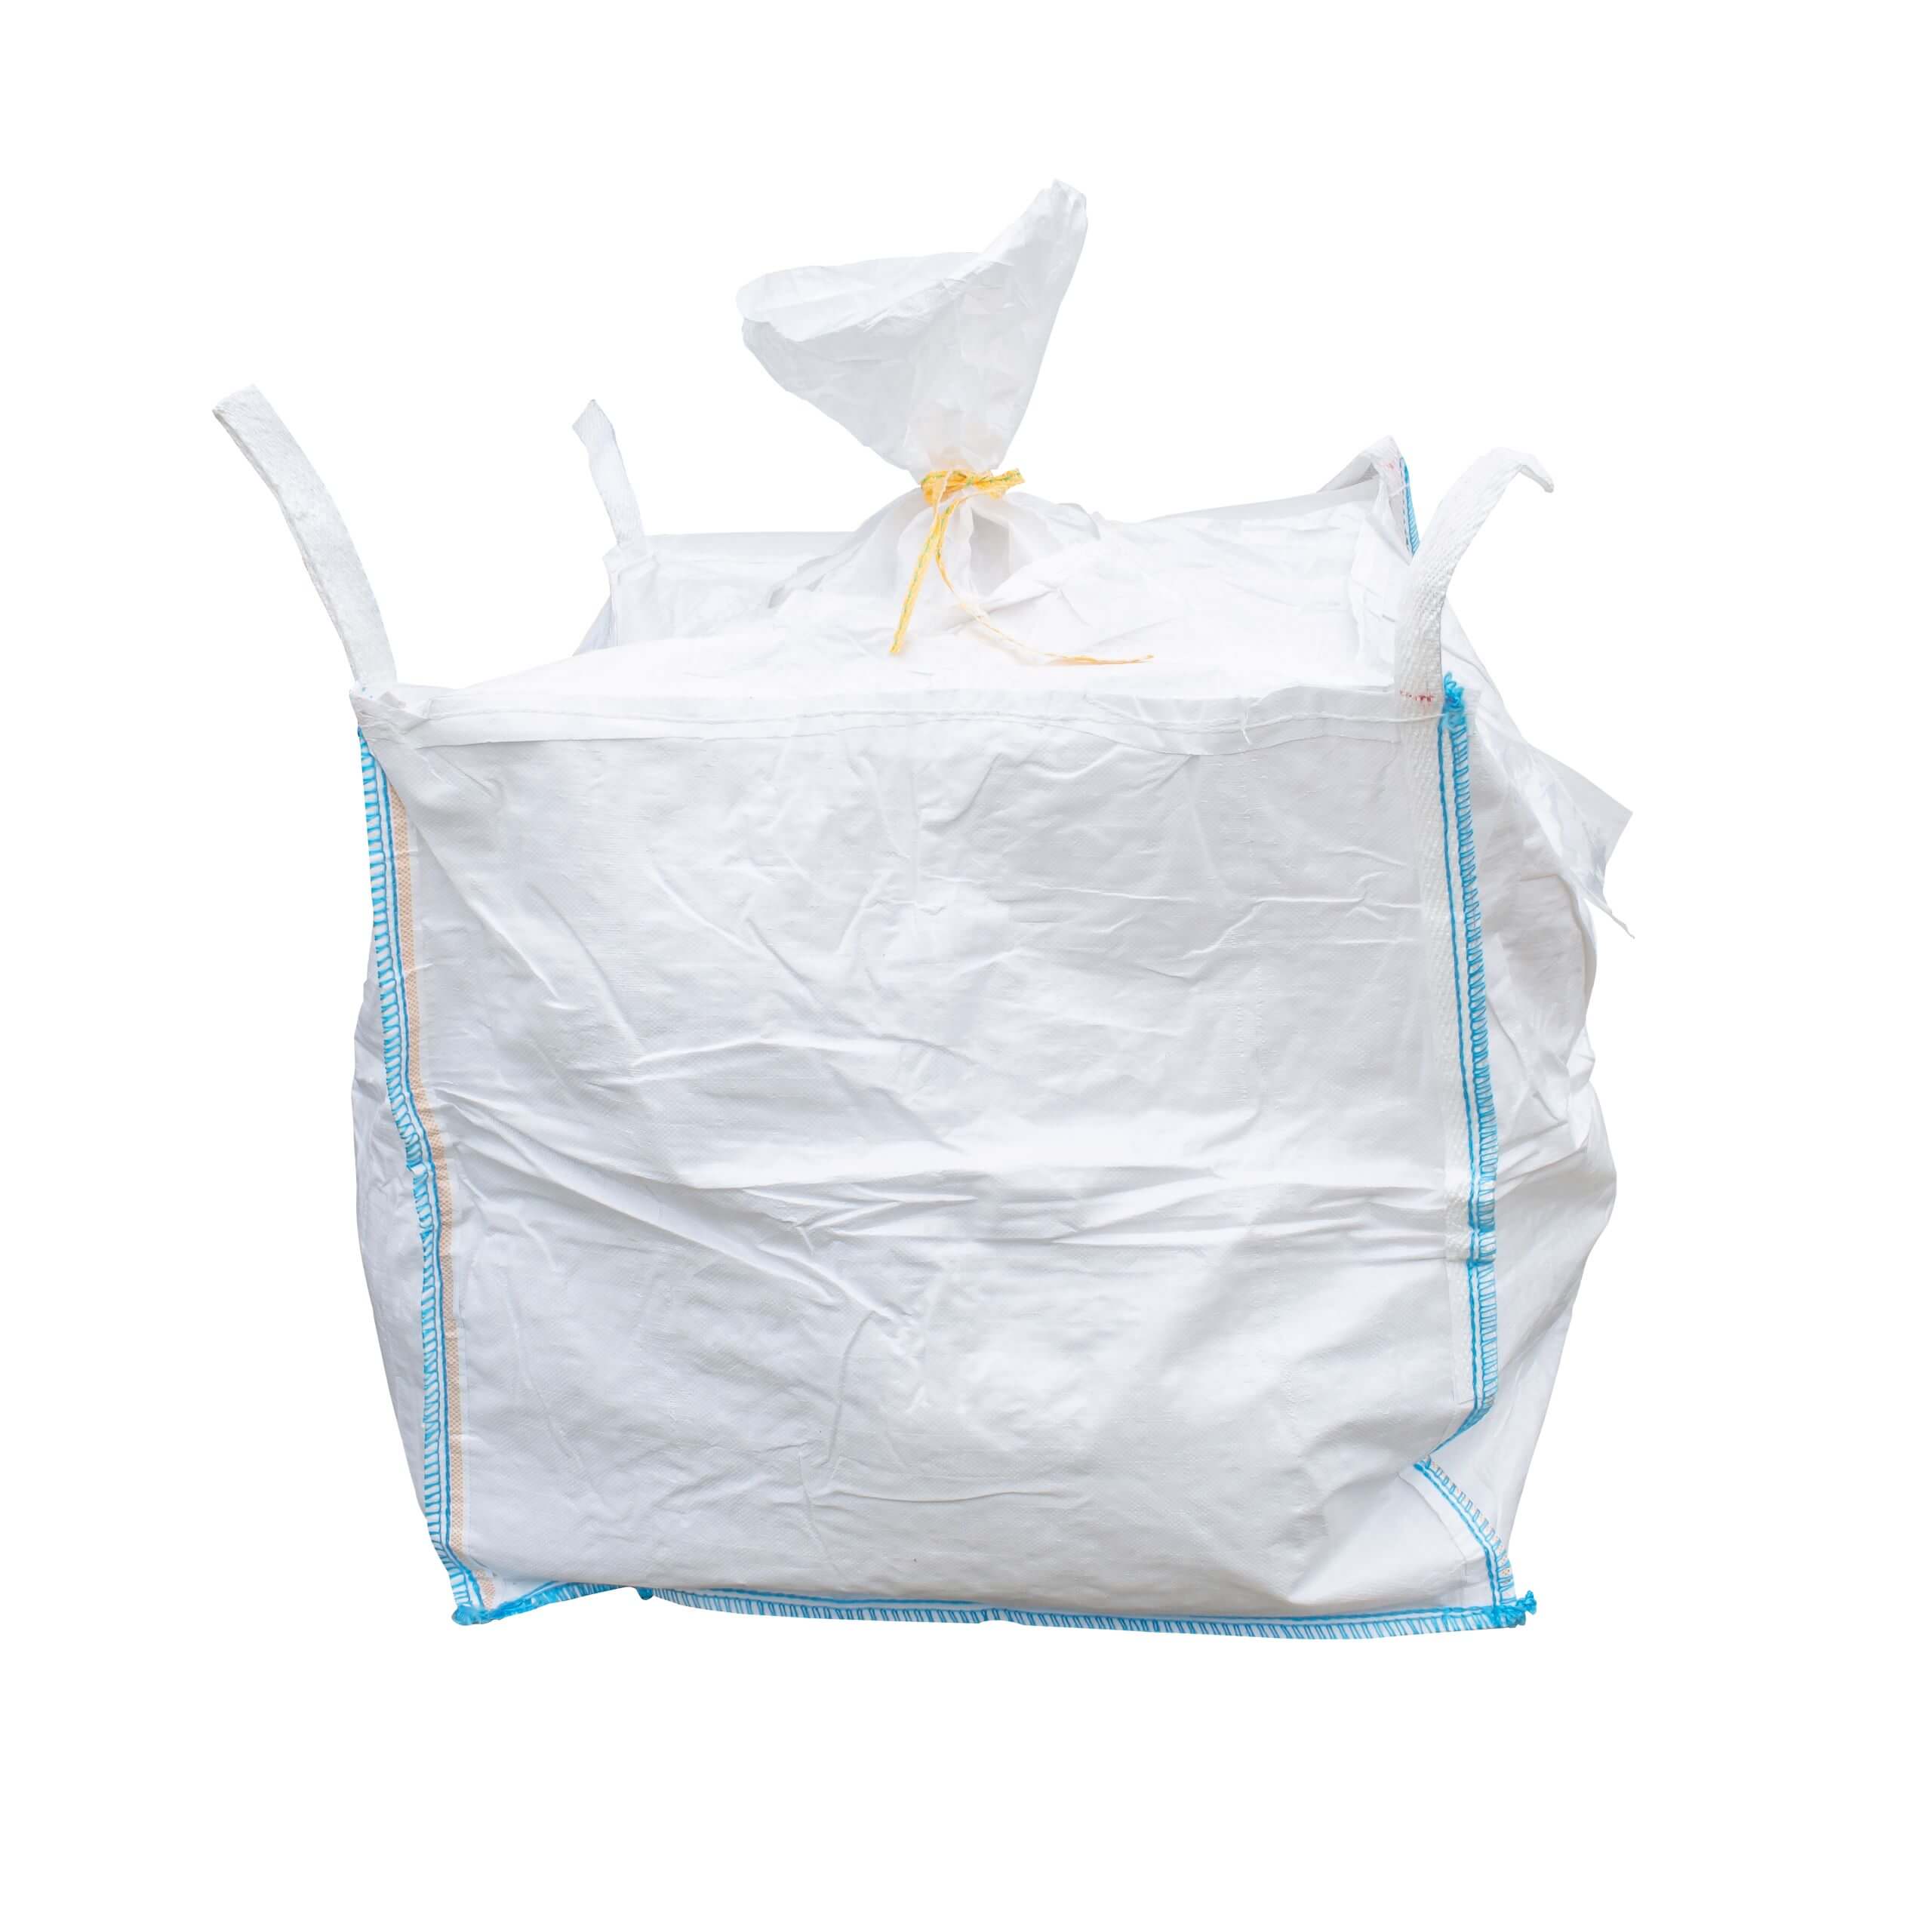 An image of one of our 1 Tonne Bulk Bags.